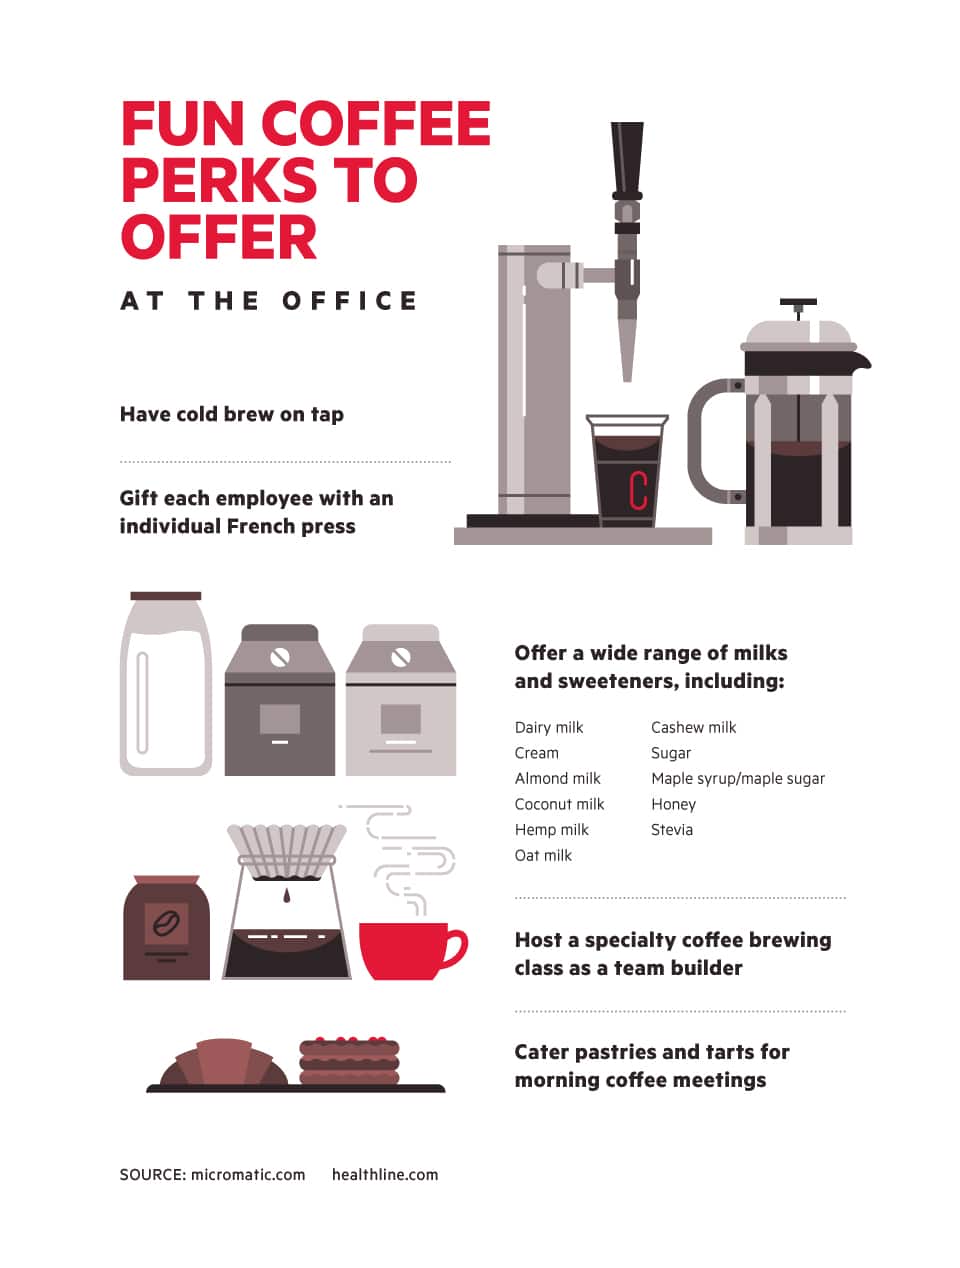 Fun Coffee Perks To Offer At The Office